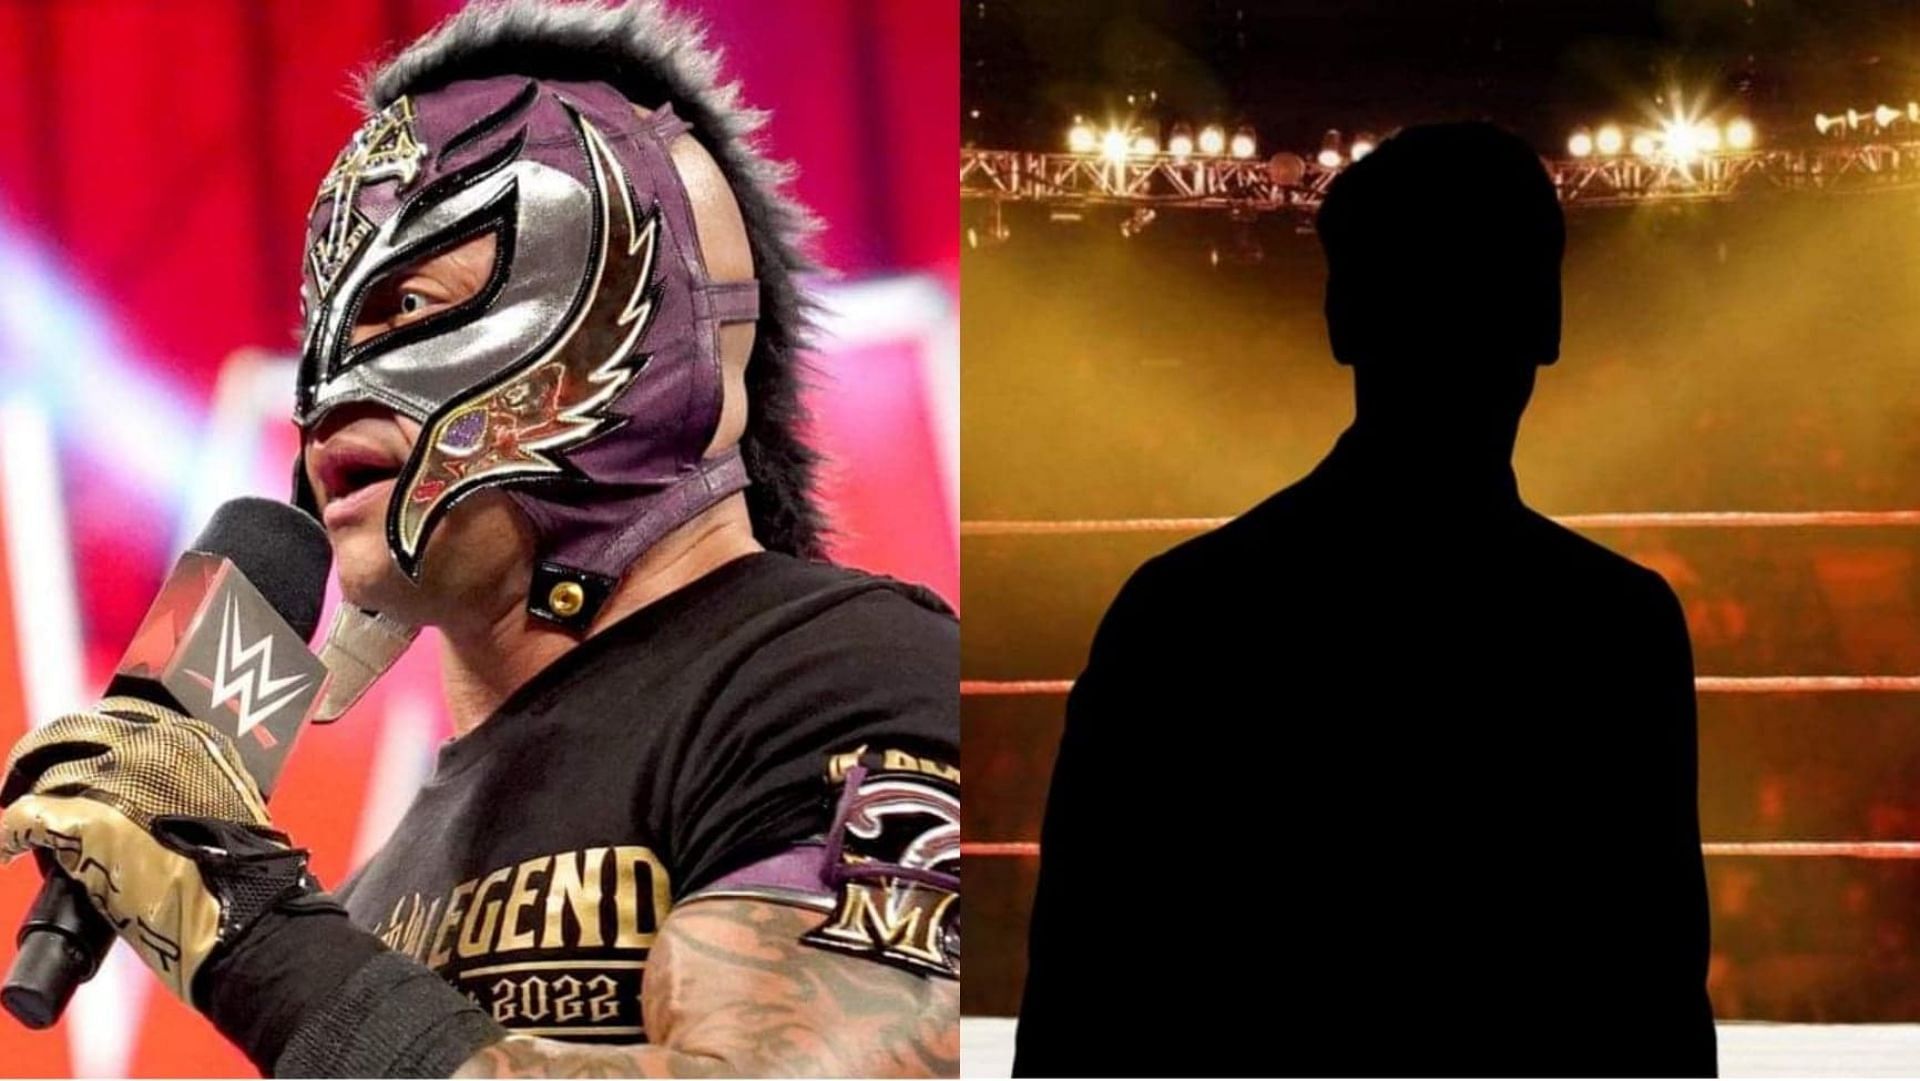 Rey Mysterio has worked for WWE for 20 years.